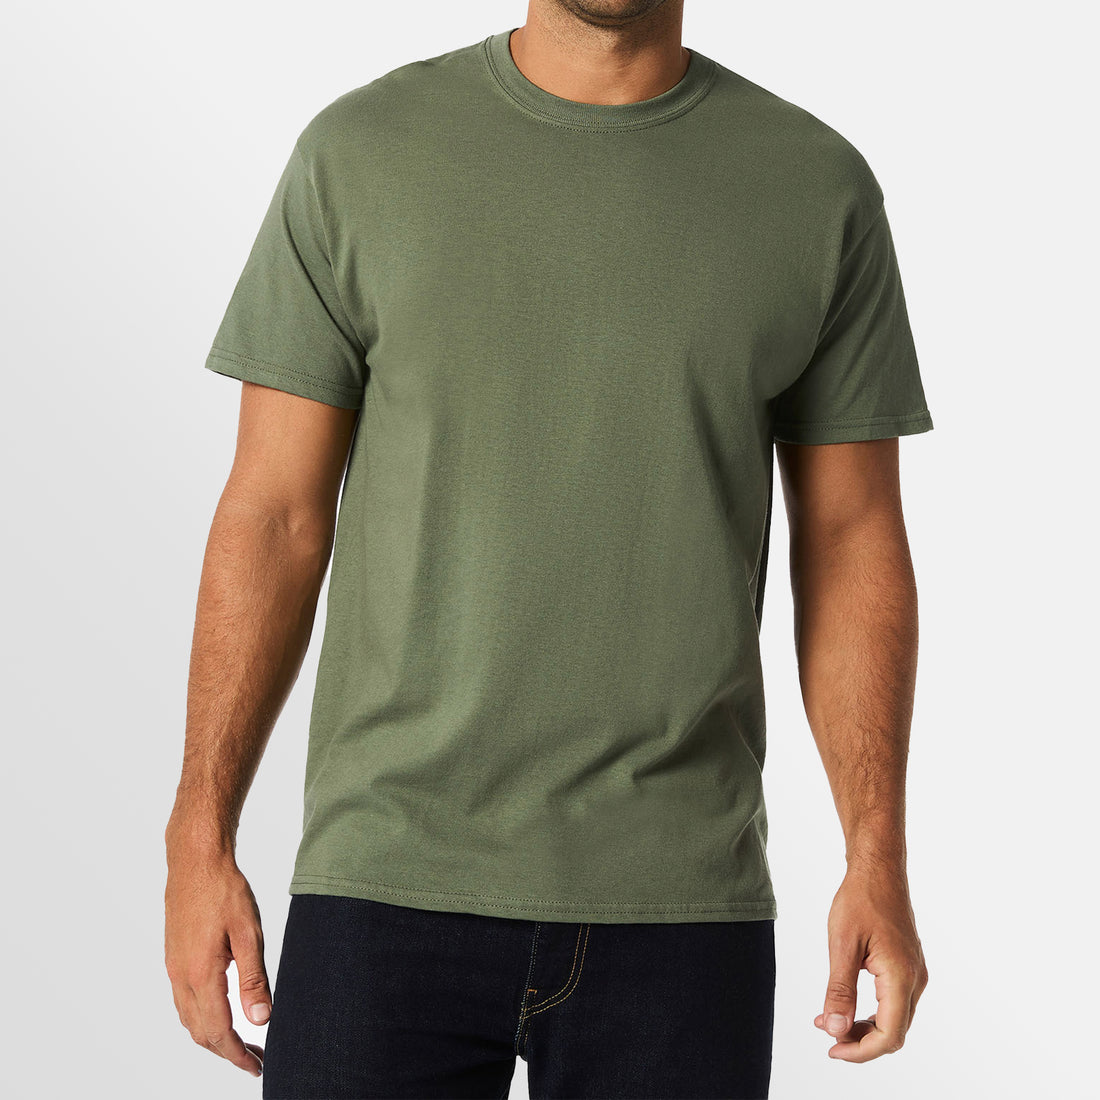 green t shirt front and back